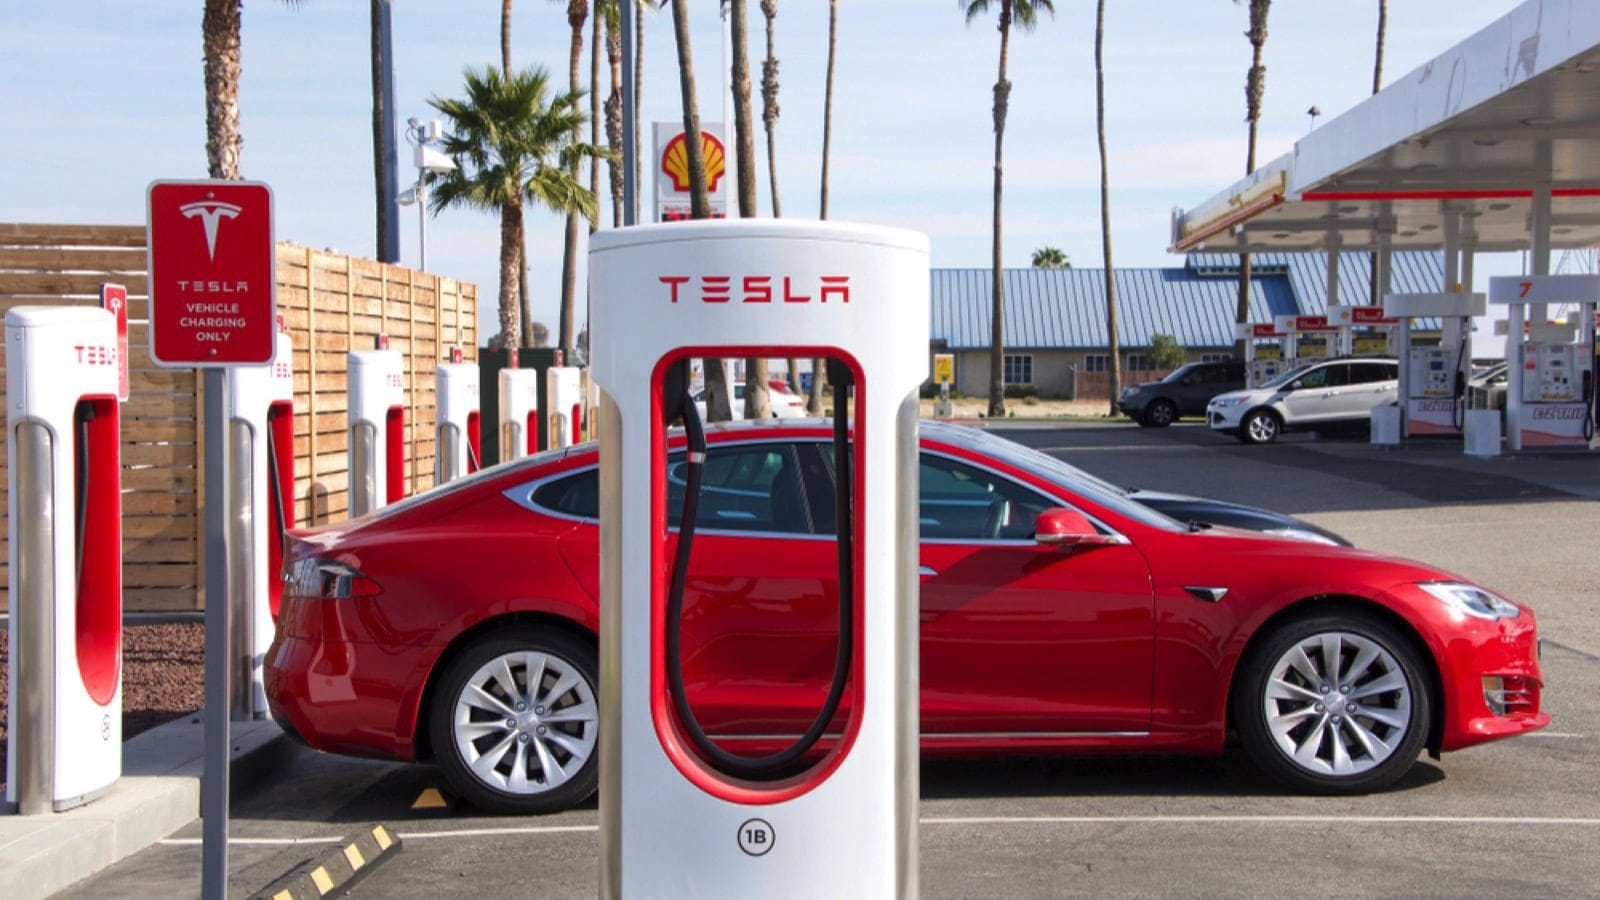 Bakersfield, CA - December 18, 2017: Tesla Super Charging station on Stockdale Hwy and the 5 fwy. Tesla Supercharger stations allow Tesla cars to be fast-charged at the network within an hour.